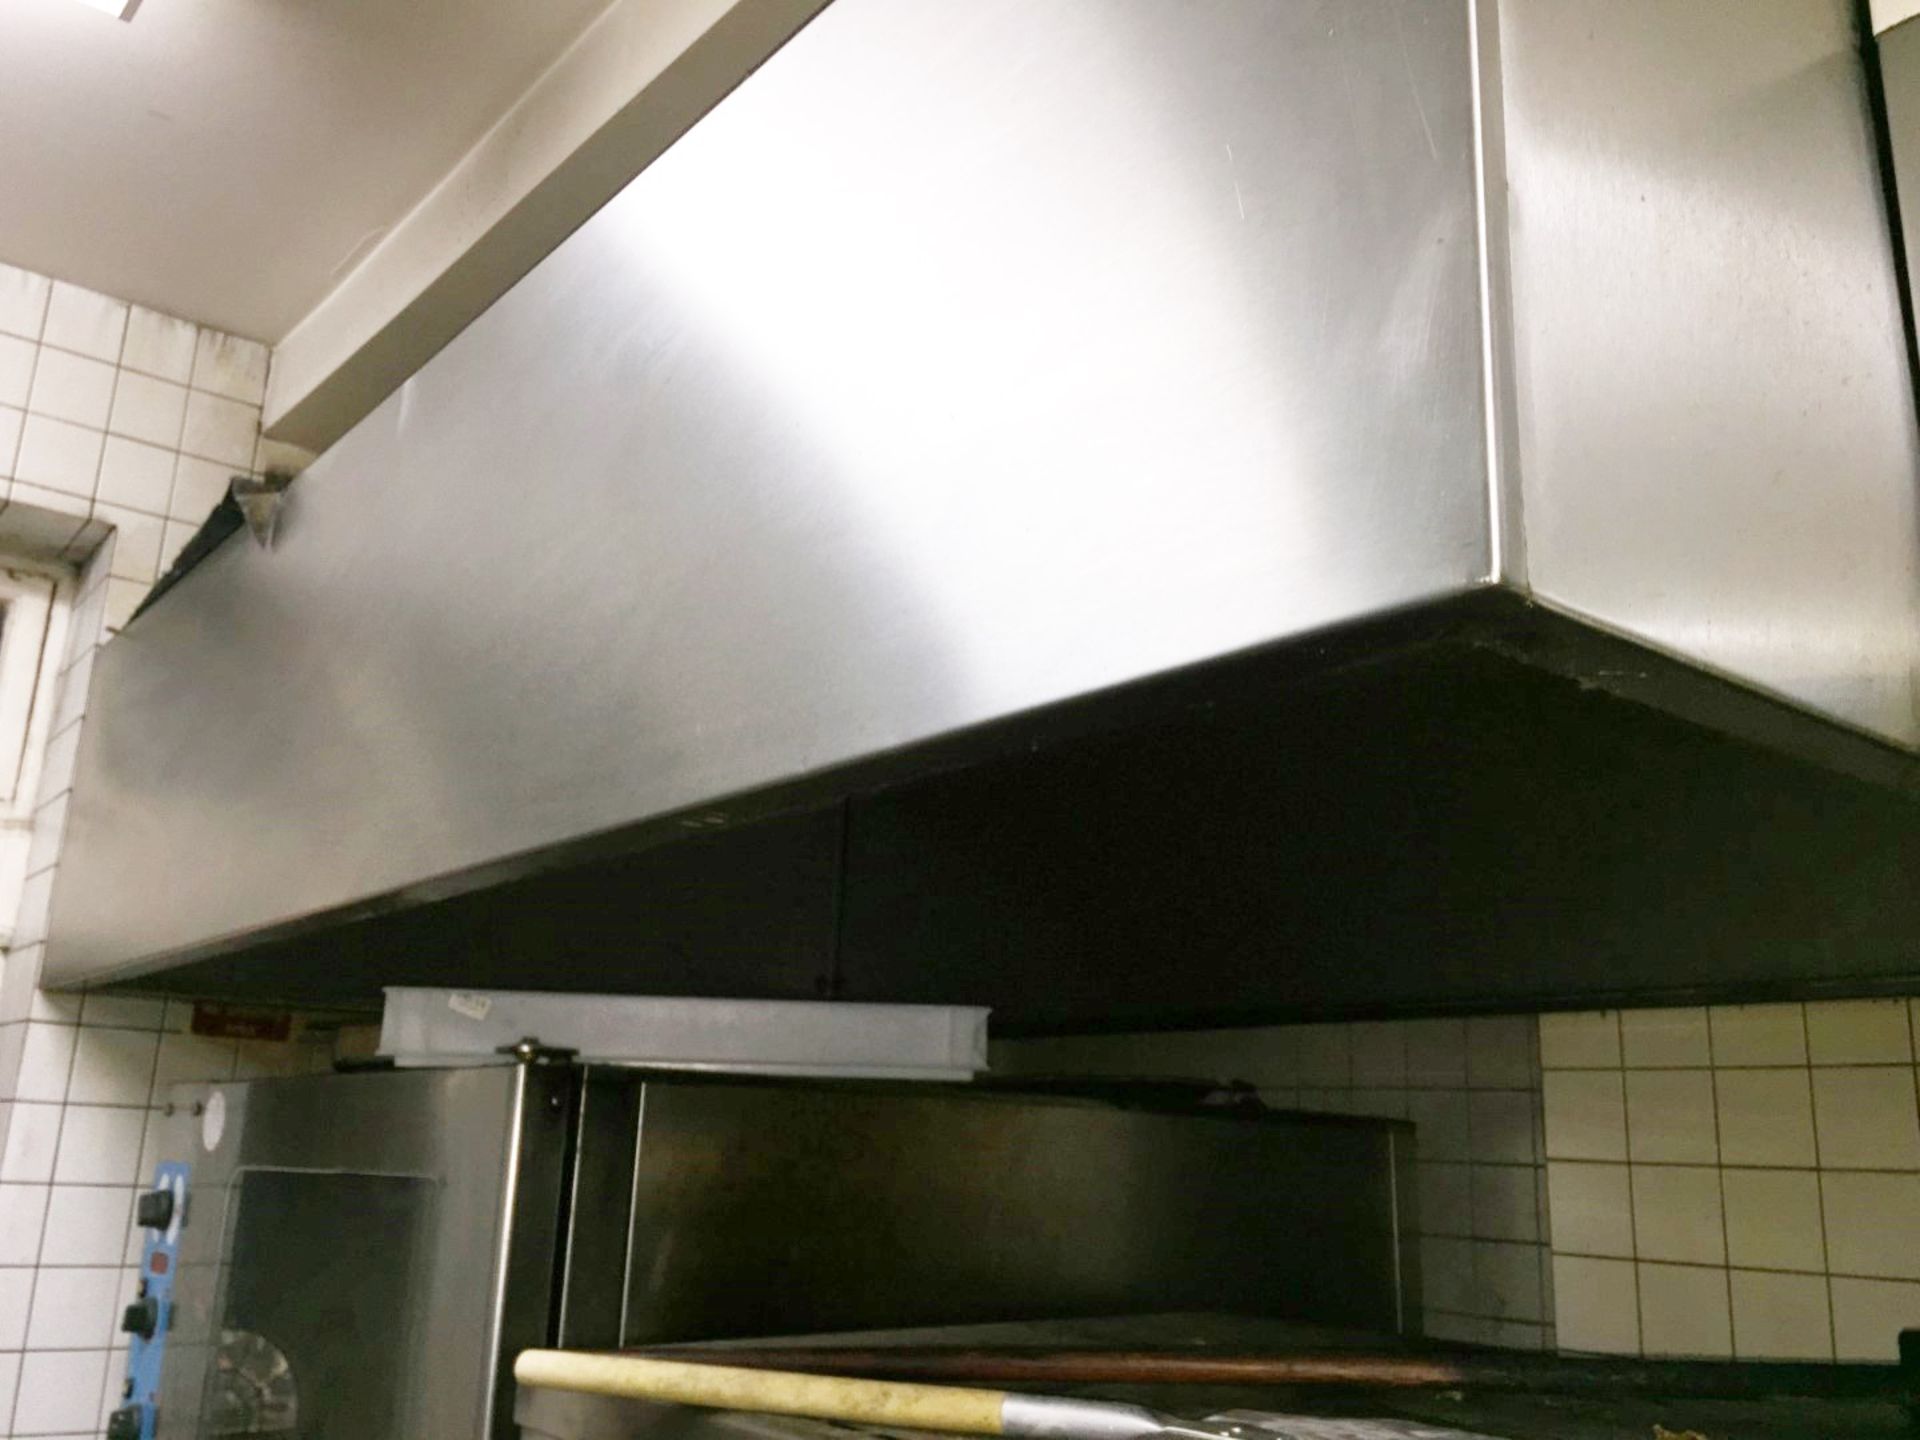 1 x Overhead Stainless Steel Commercial Kitchen Extractor Hood - CL188 - Ref 2ND88 - Approx Size